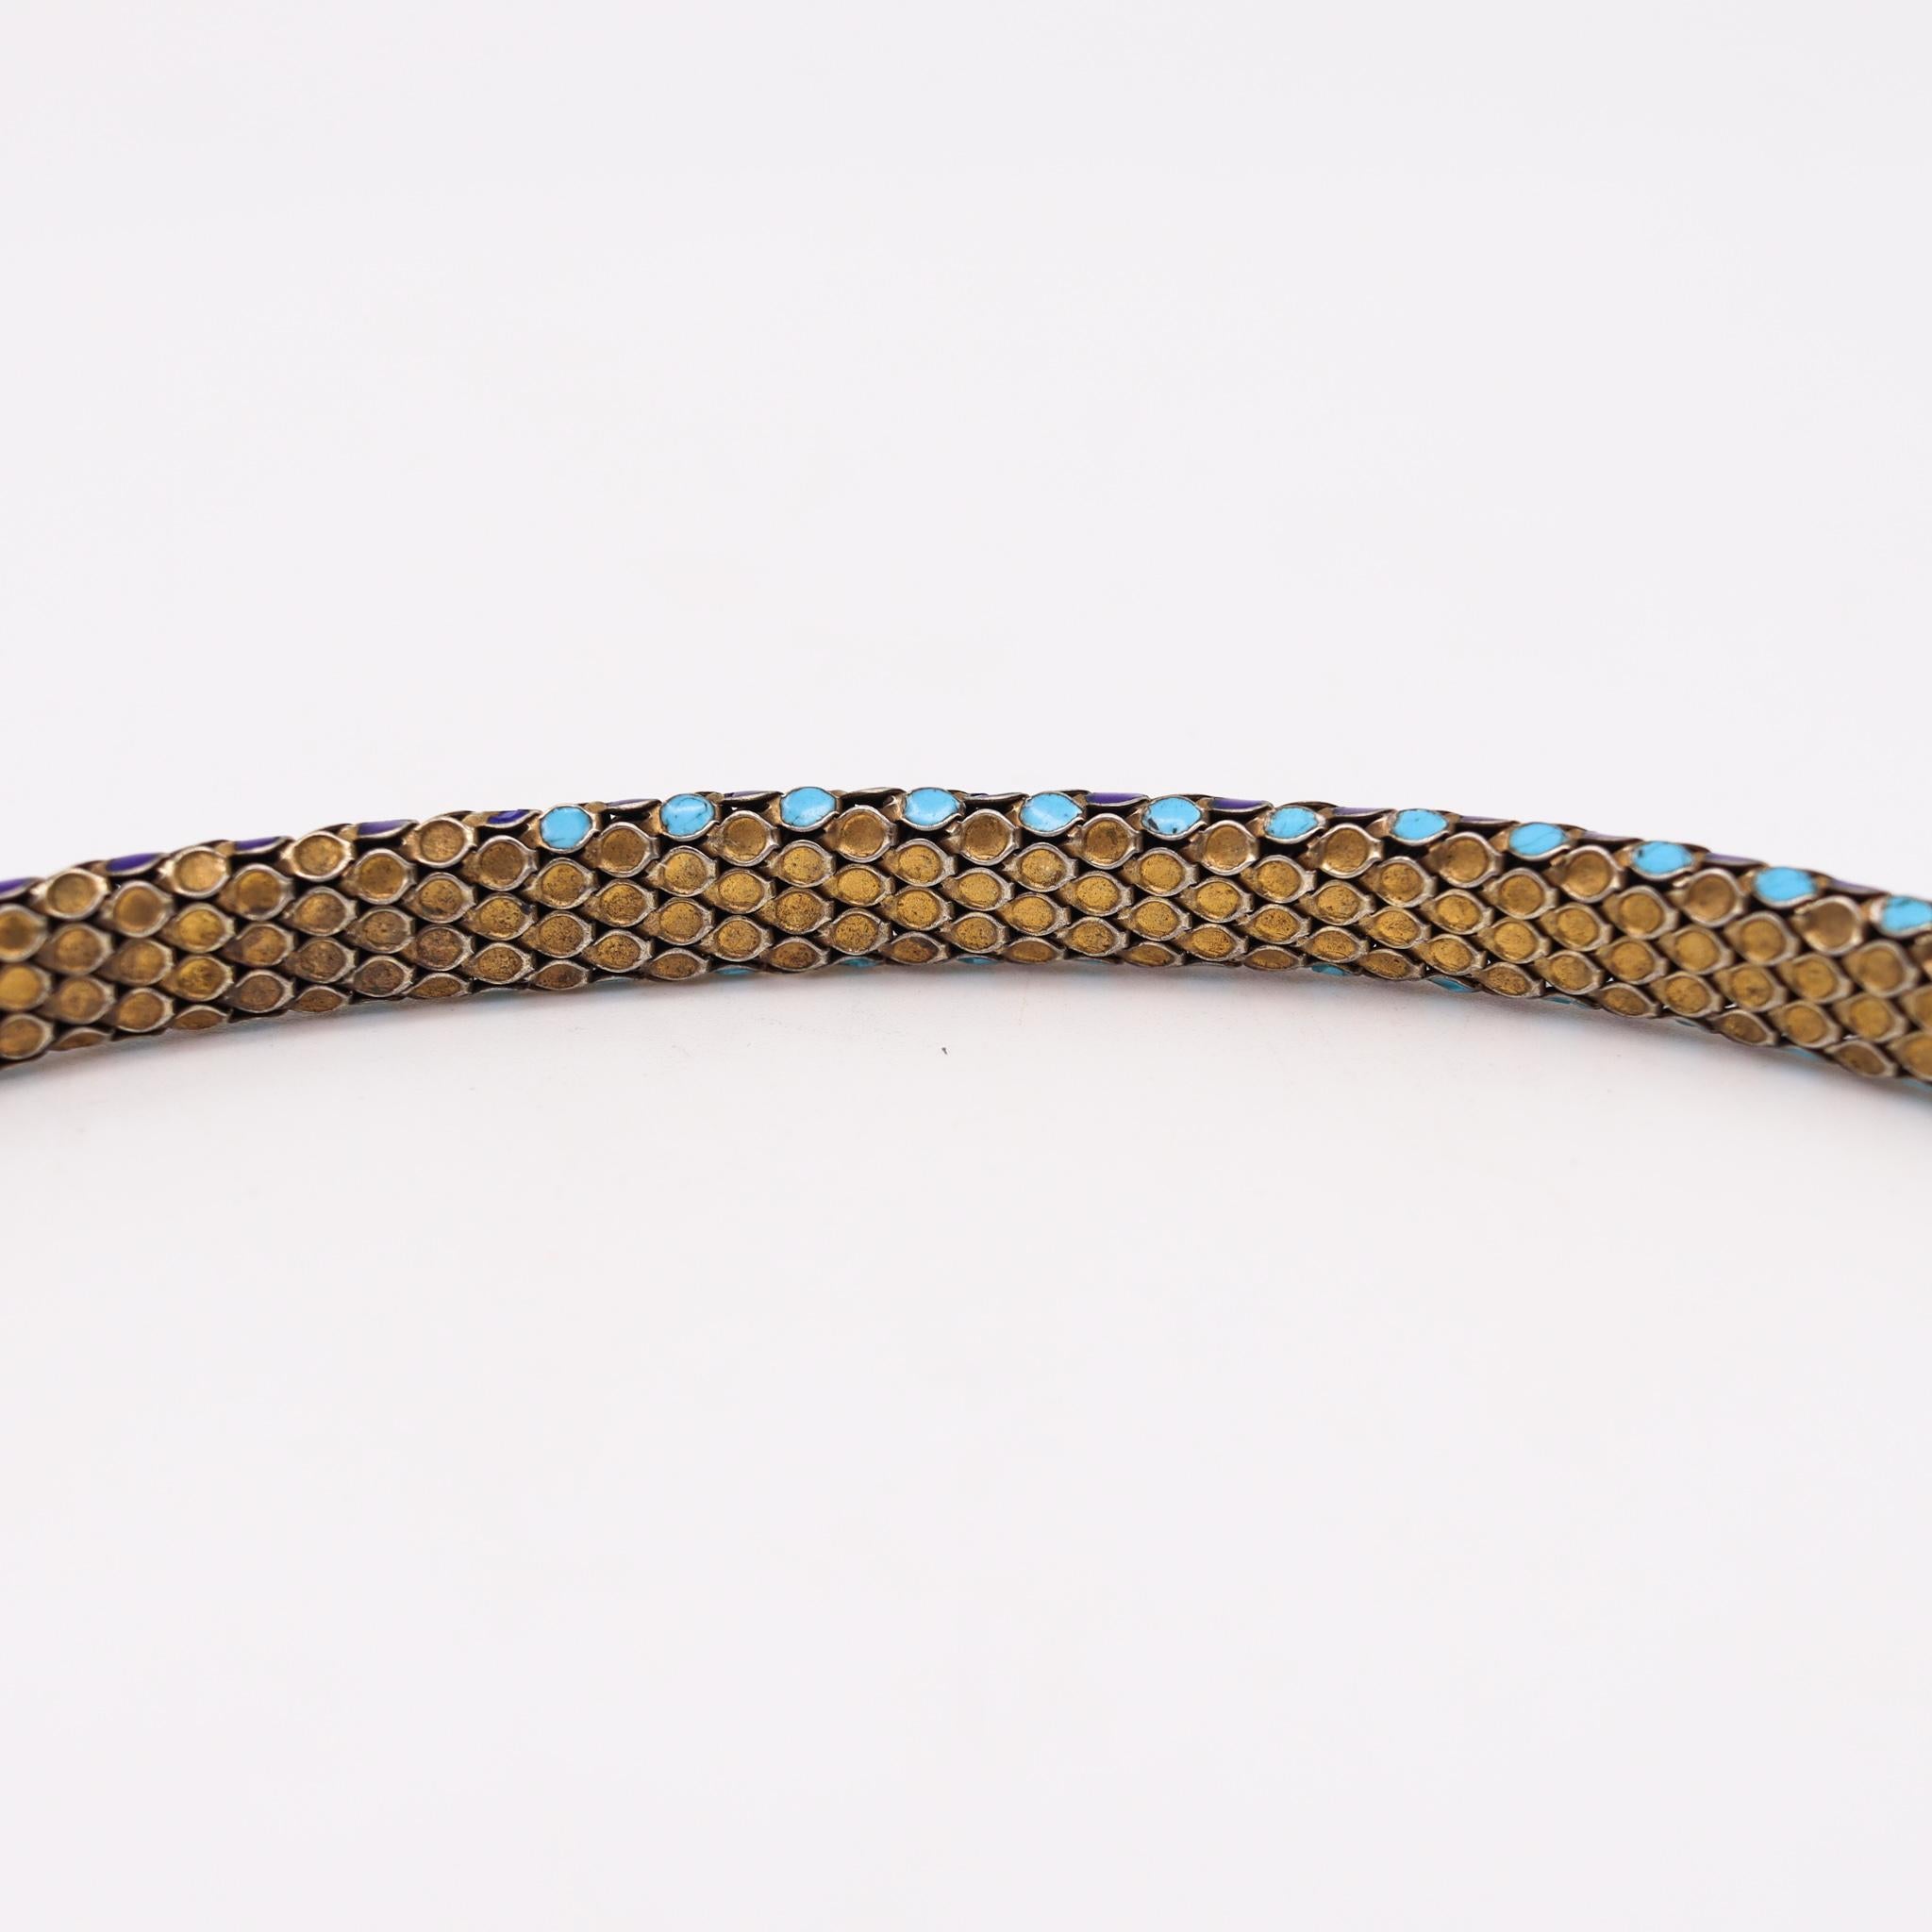 Women's French 1880 Egyptian Revival Snakes Necklace in Silver with Champleve Cloisonné For Sale